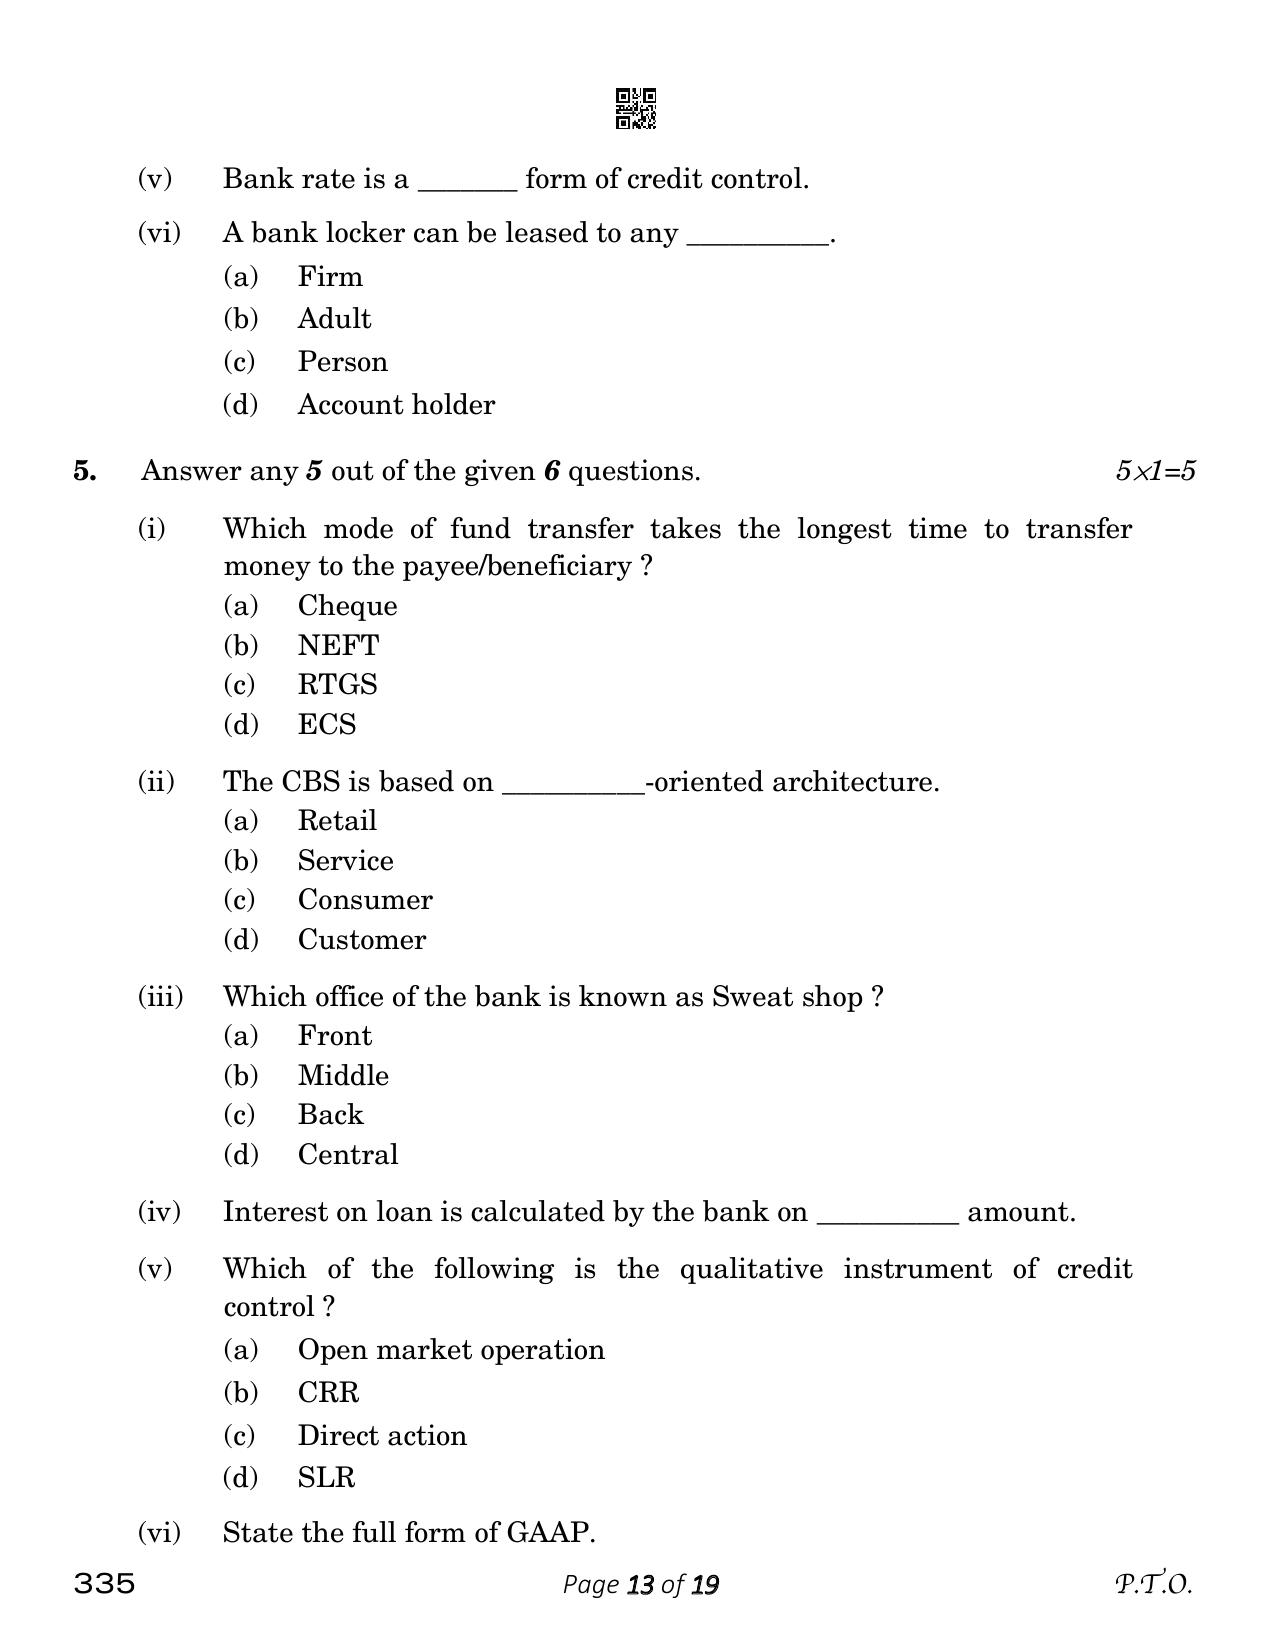 CBSE Class 12 Banking (Compartment) 2023 Question Paper - Page 13